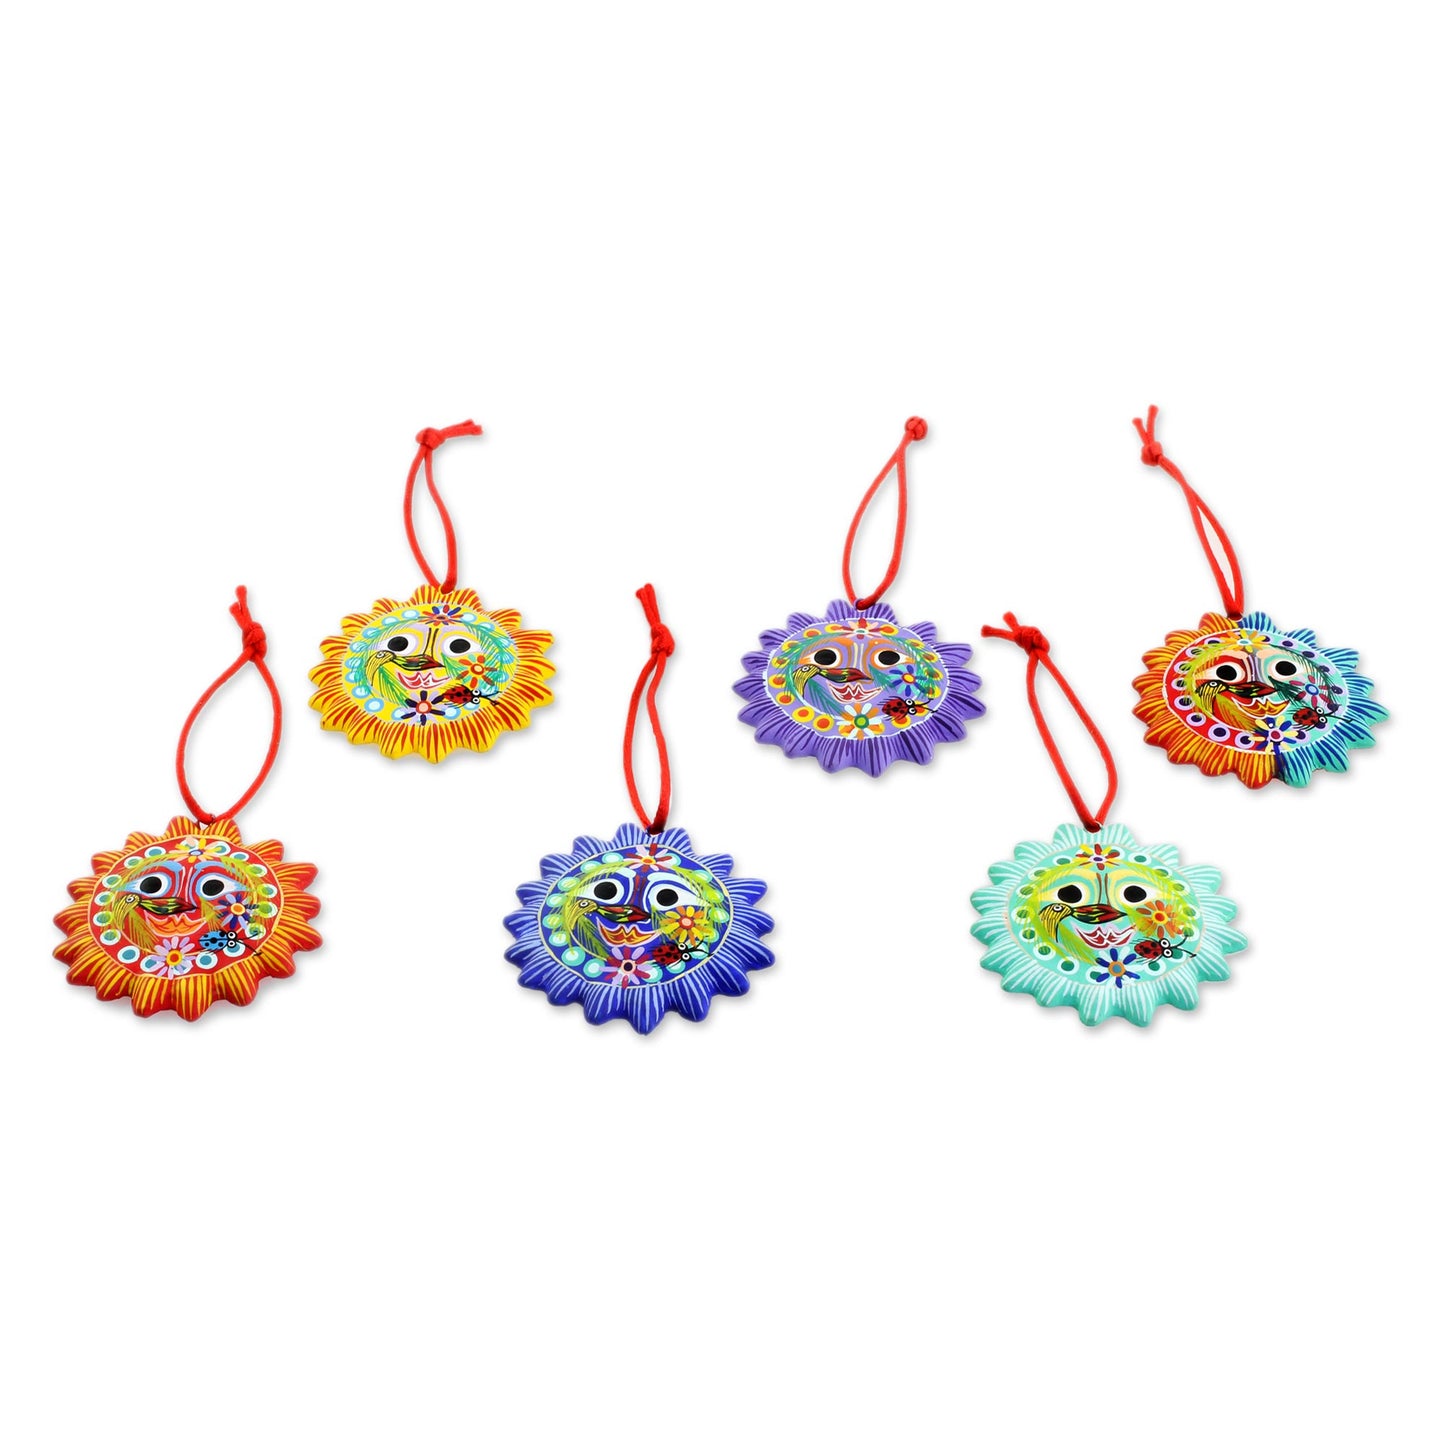 Lord of the Sun Ceramic Ornaments - Set of 6